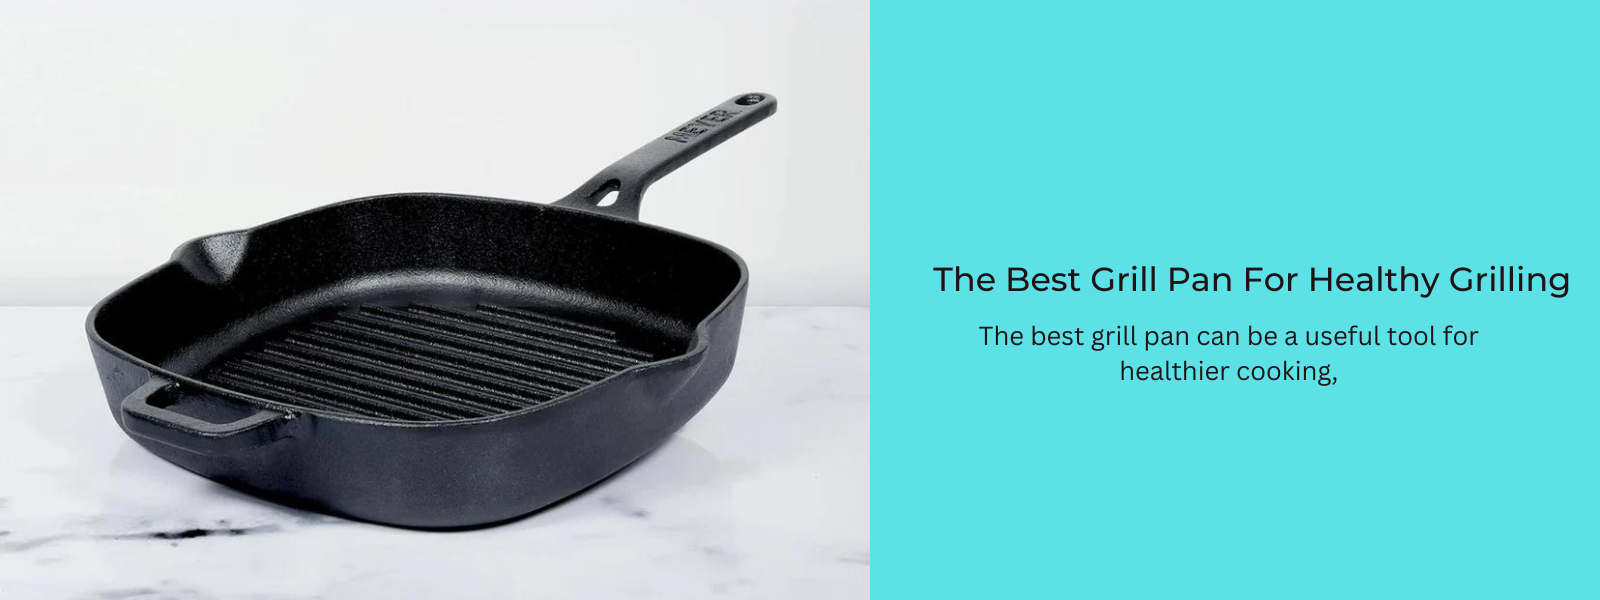 The Best Grill Pan For Healthy Grilling